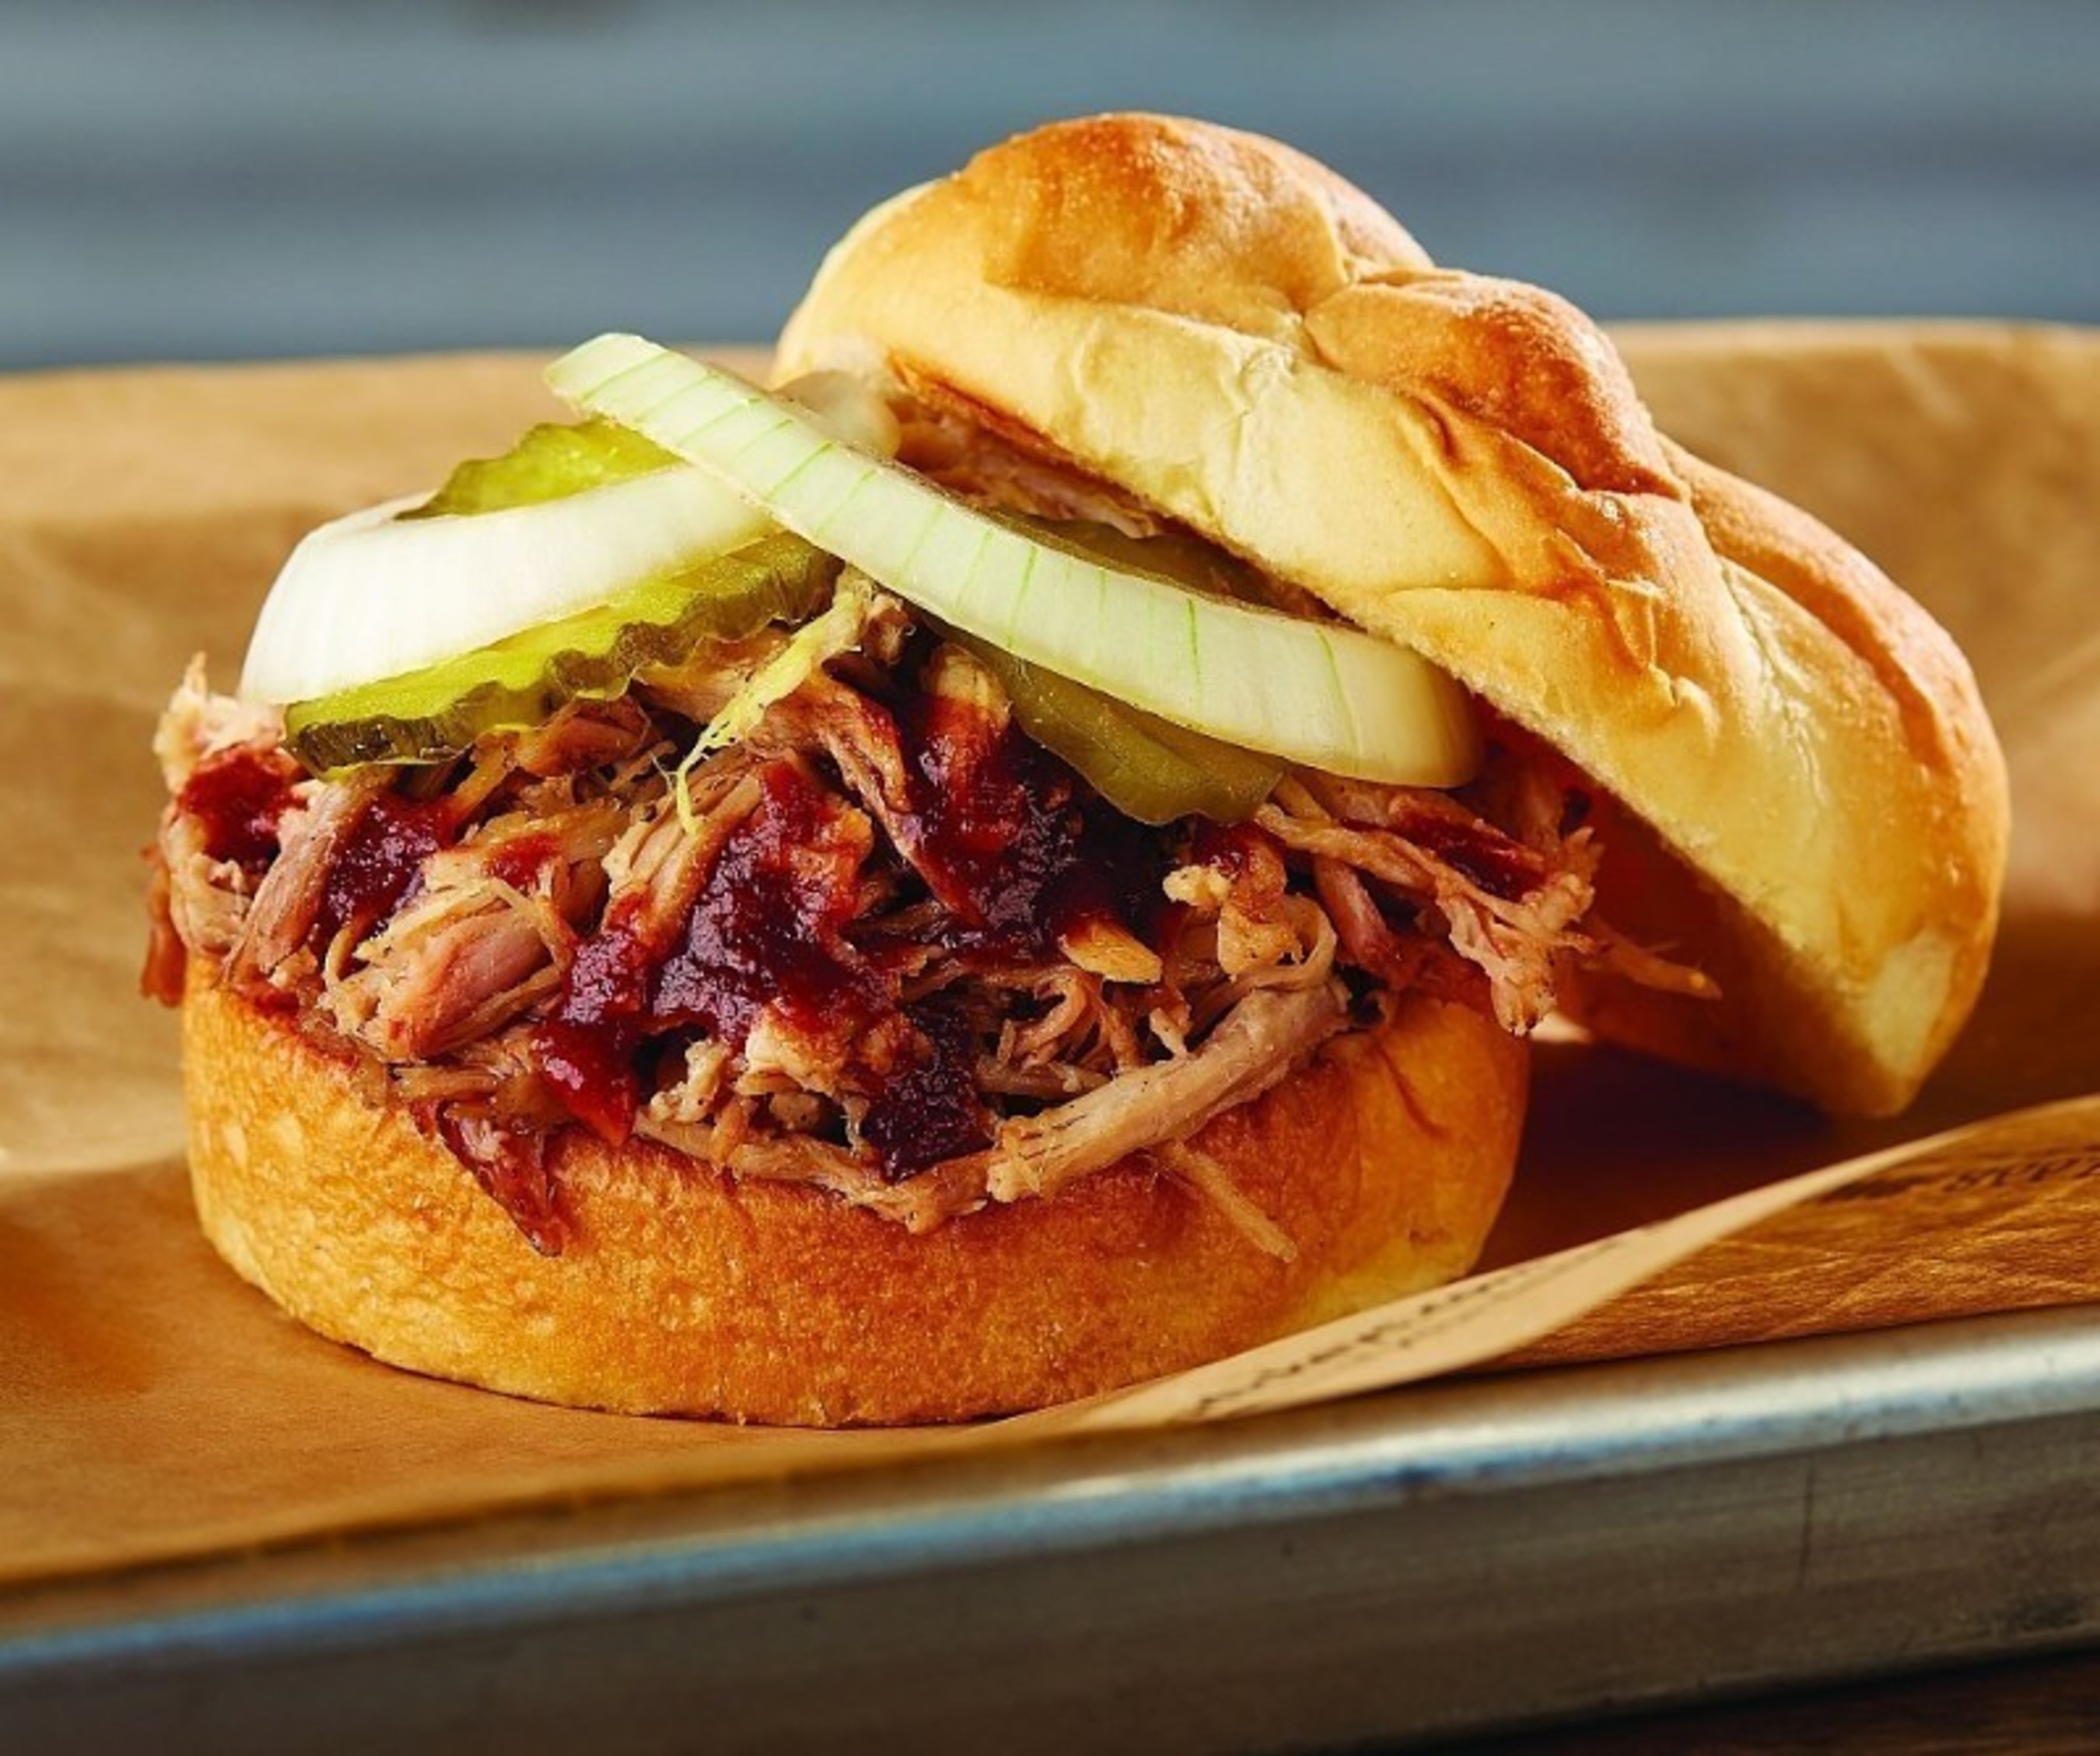 Dickey's Barbecue Pit opens Thursday in Tucson with a three day grand opening. Celebration includes $2 pulled pork sandwiches, three free barbecue for a year prizes and more barbecue giveaways.